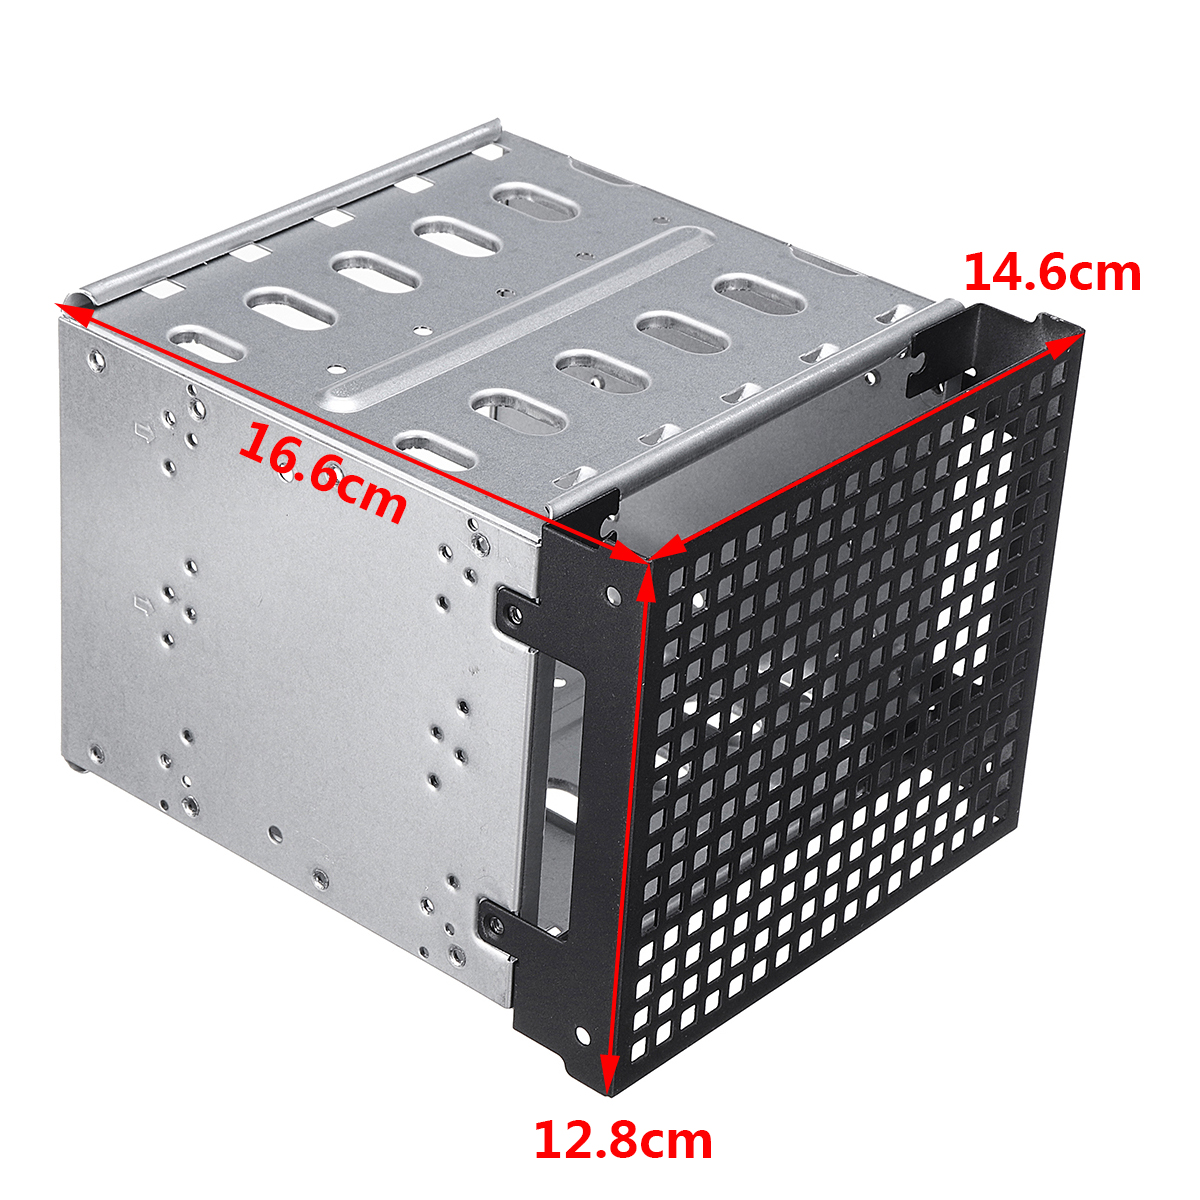 5.25" to 5x 3.5" SATA SAS HDD Cage Rack Hard Drive Tray Caddy Converter with Fan Space 24